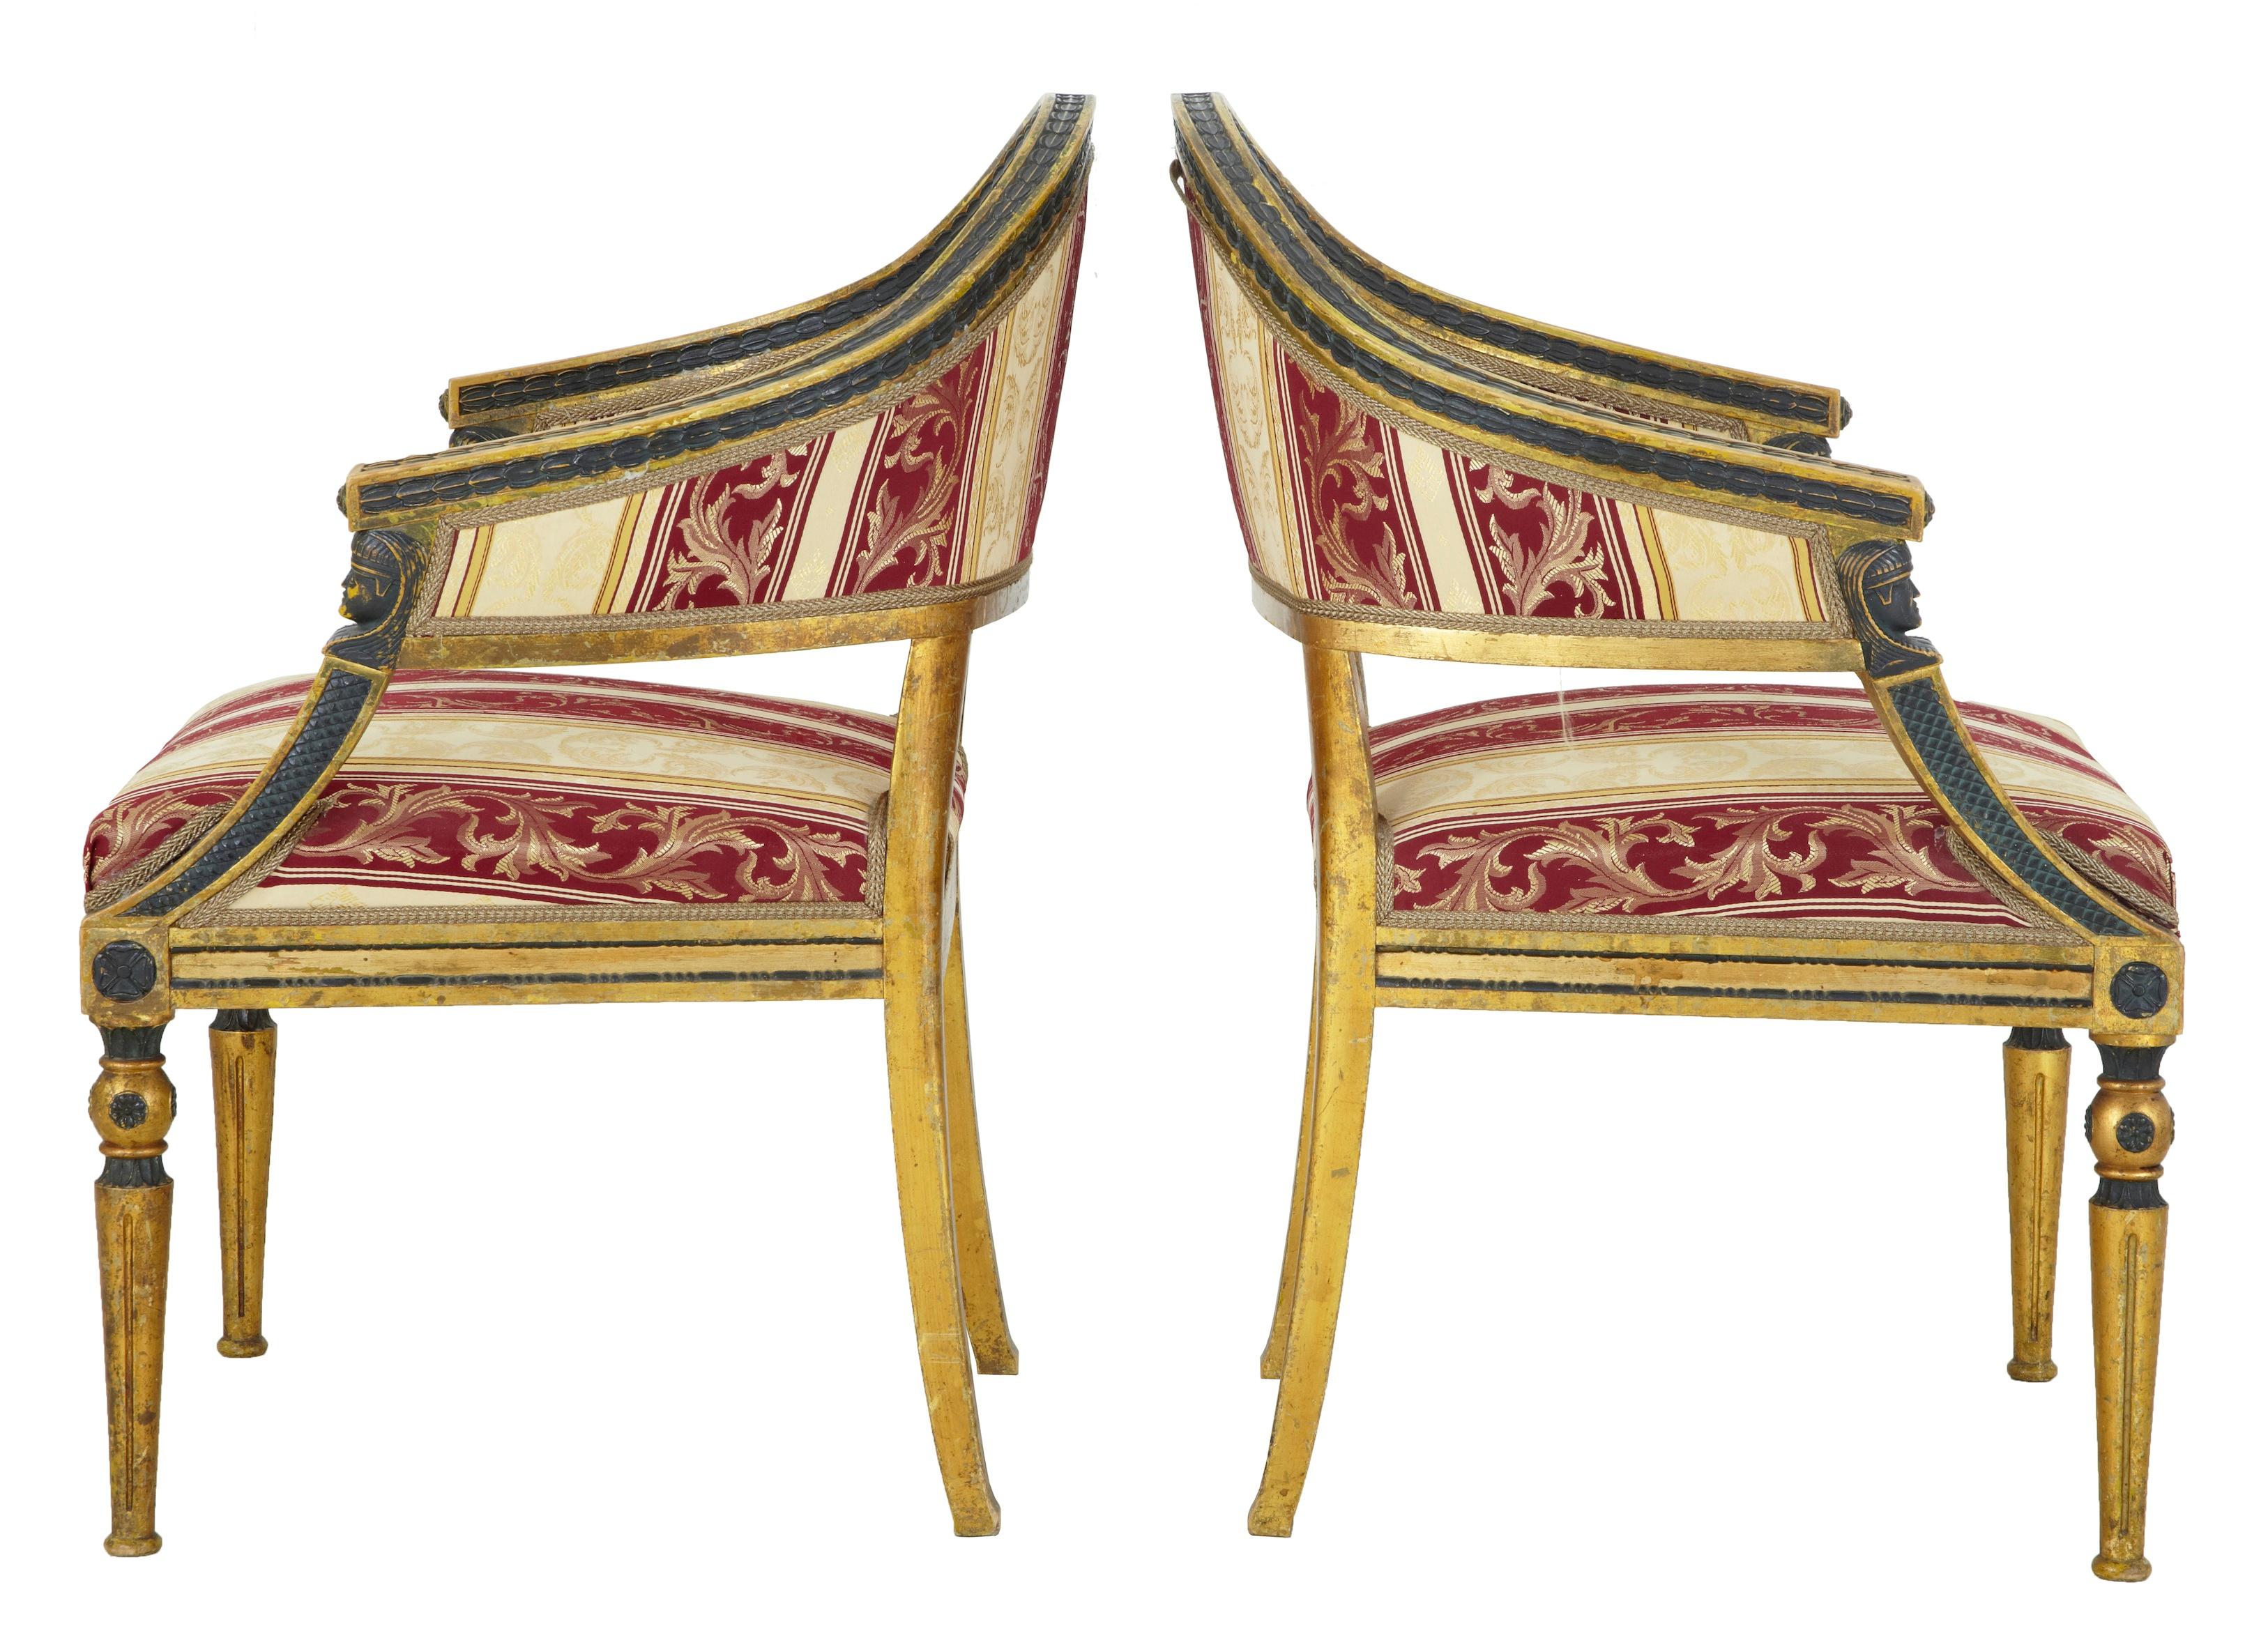 Pair of fine quality shaped back gilt armchairs, circa 1860.
Unusual shaped back with ebonized leaf detailing contrasting with the gilt.
Egyptian style mounts below the arms.
Standing on tapered legs.
Upholstered in later silk material.

Seat